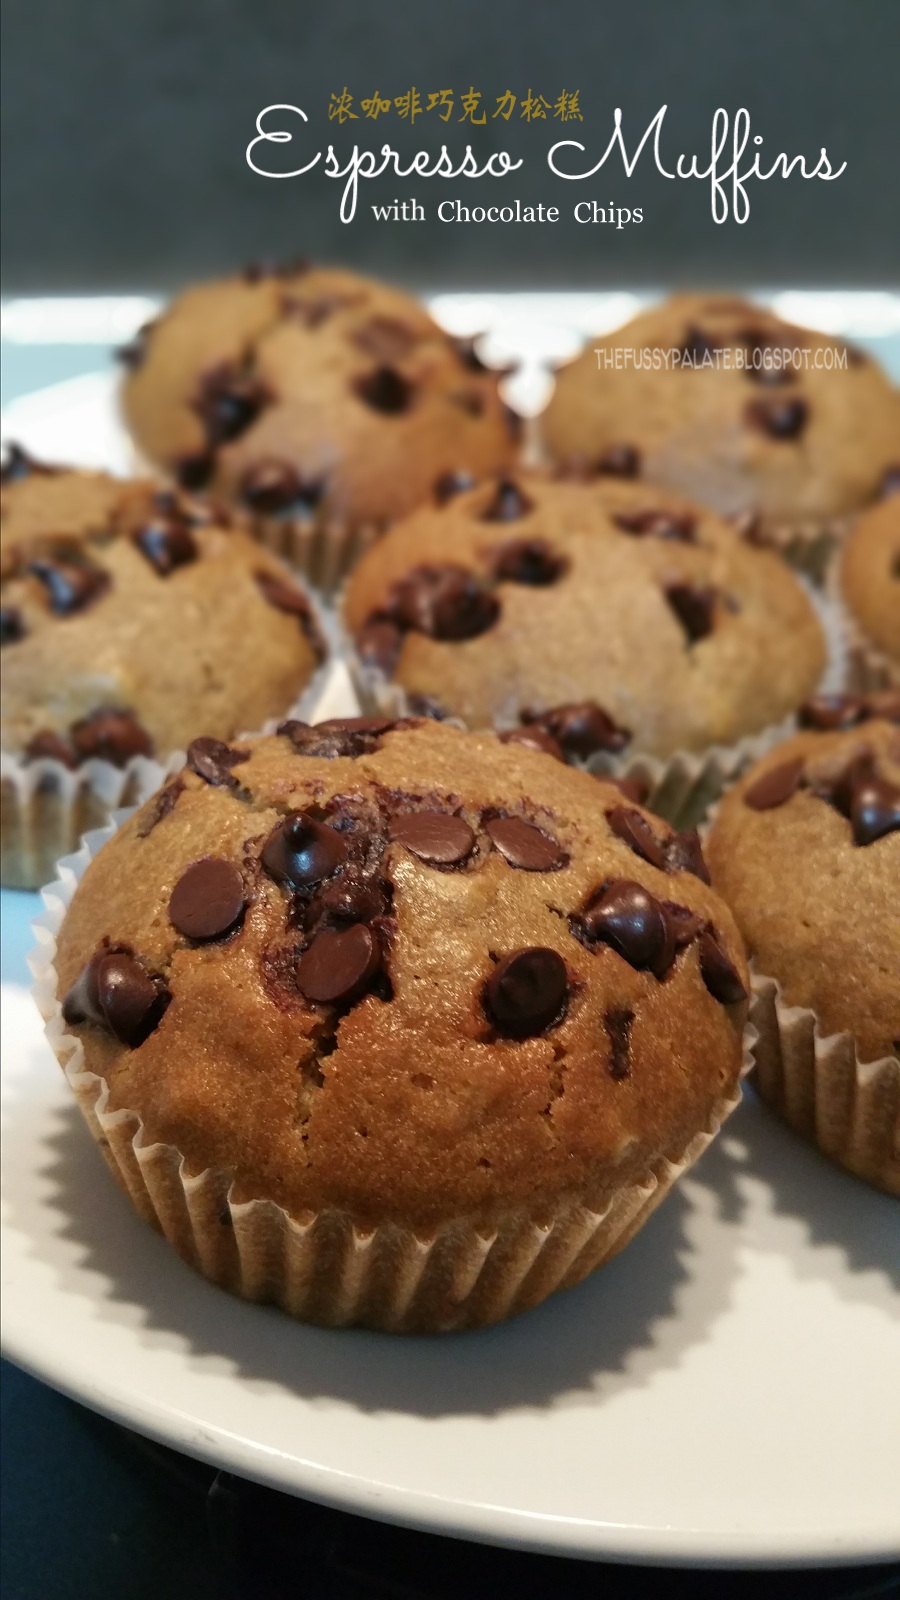 The Fussy Palate: Espresso Muffins with Chocolate Chips